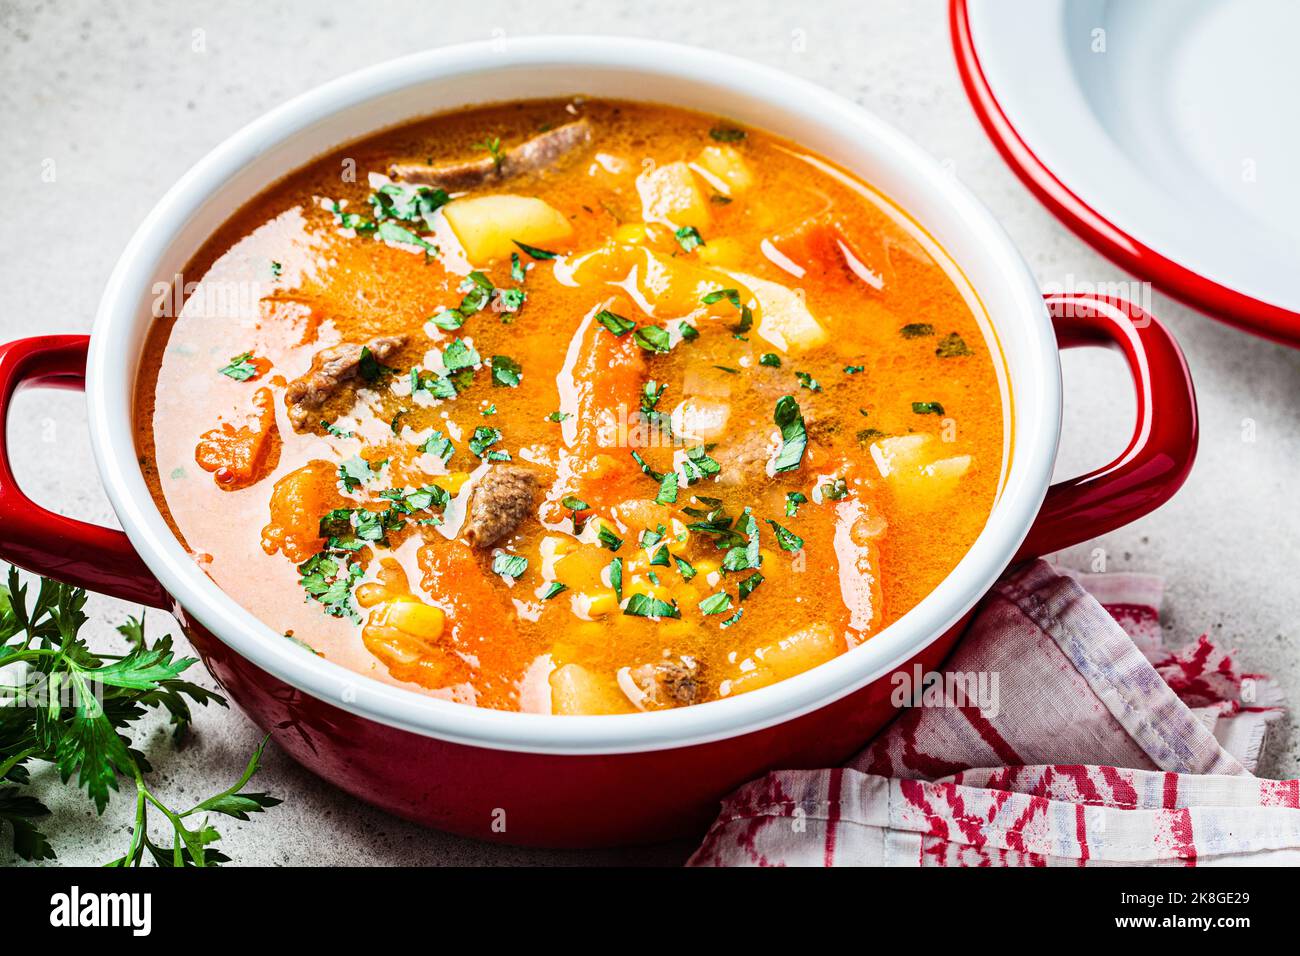 Beef meat slow-cooked soup with carrot, potato, corn and sweet potato in red saucepan. Winter comfort food concept. Stock Photo